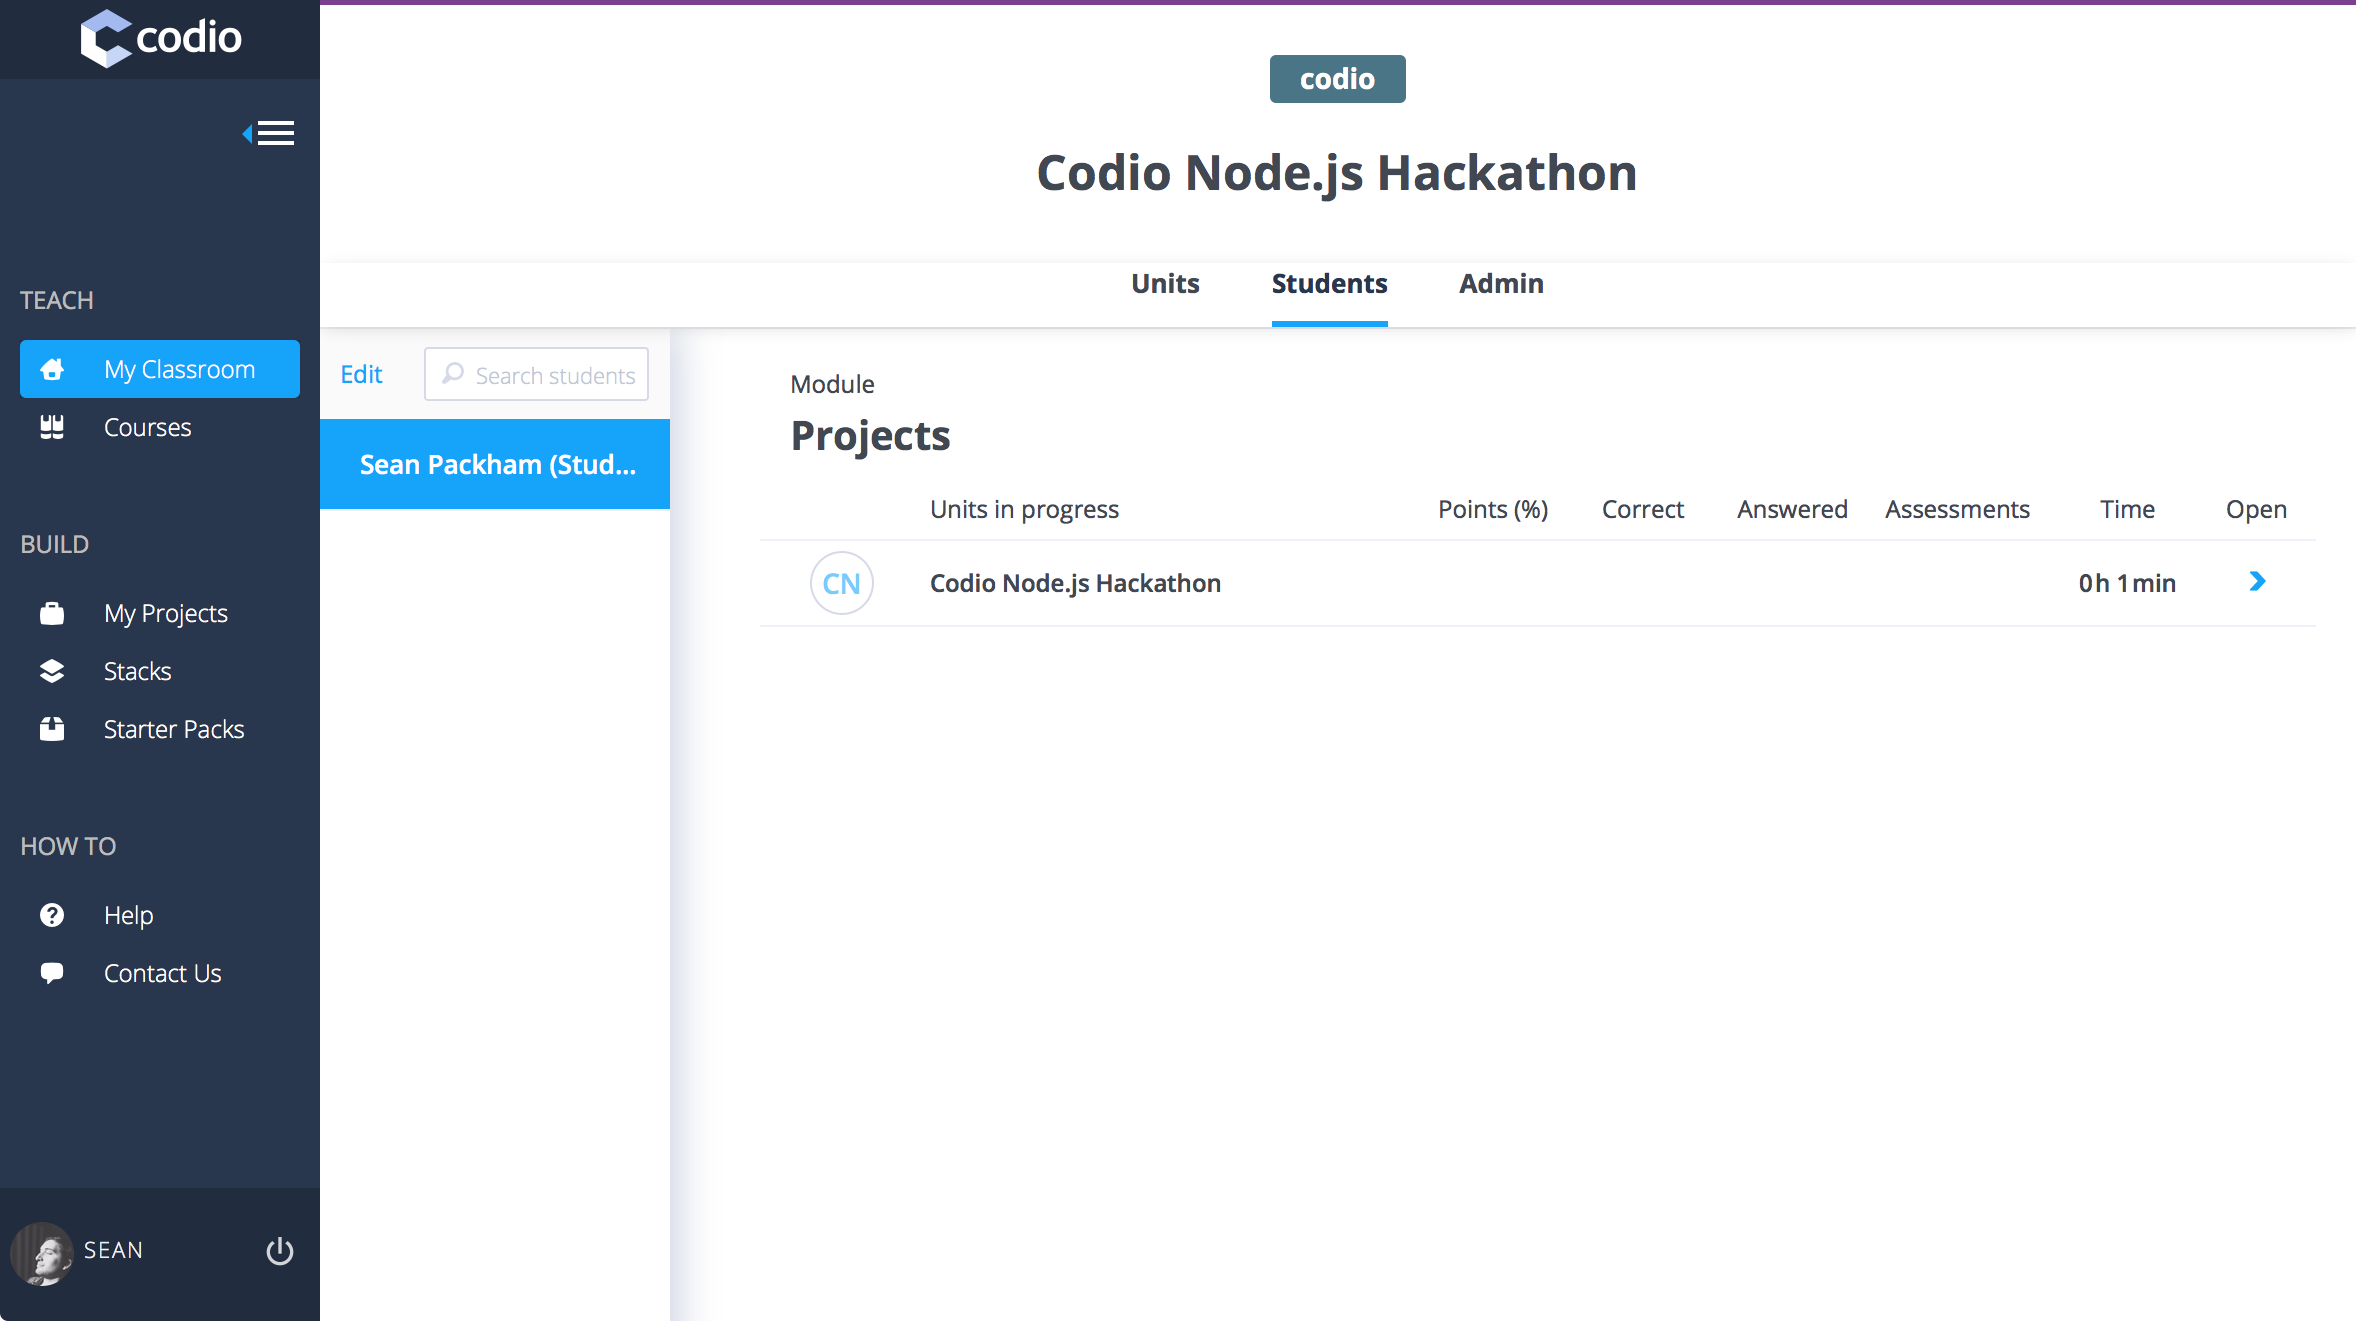 How to host a hackathon using Codio